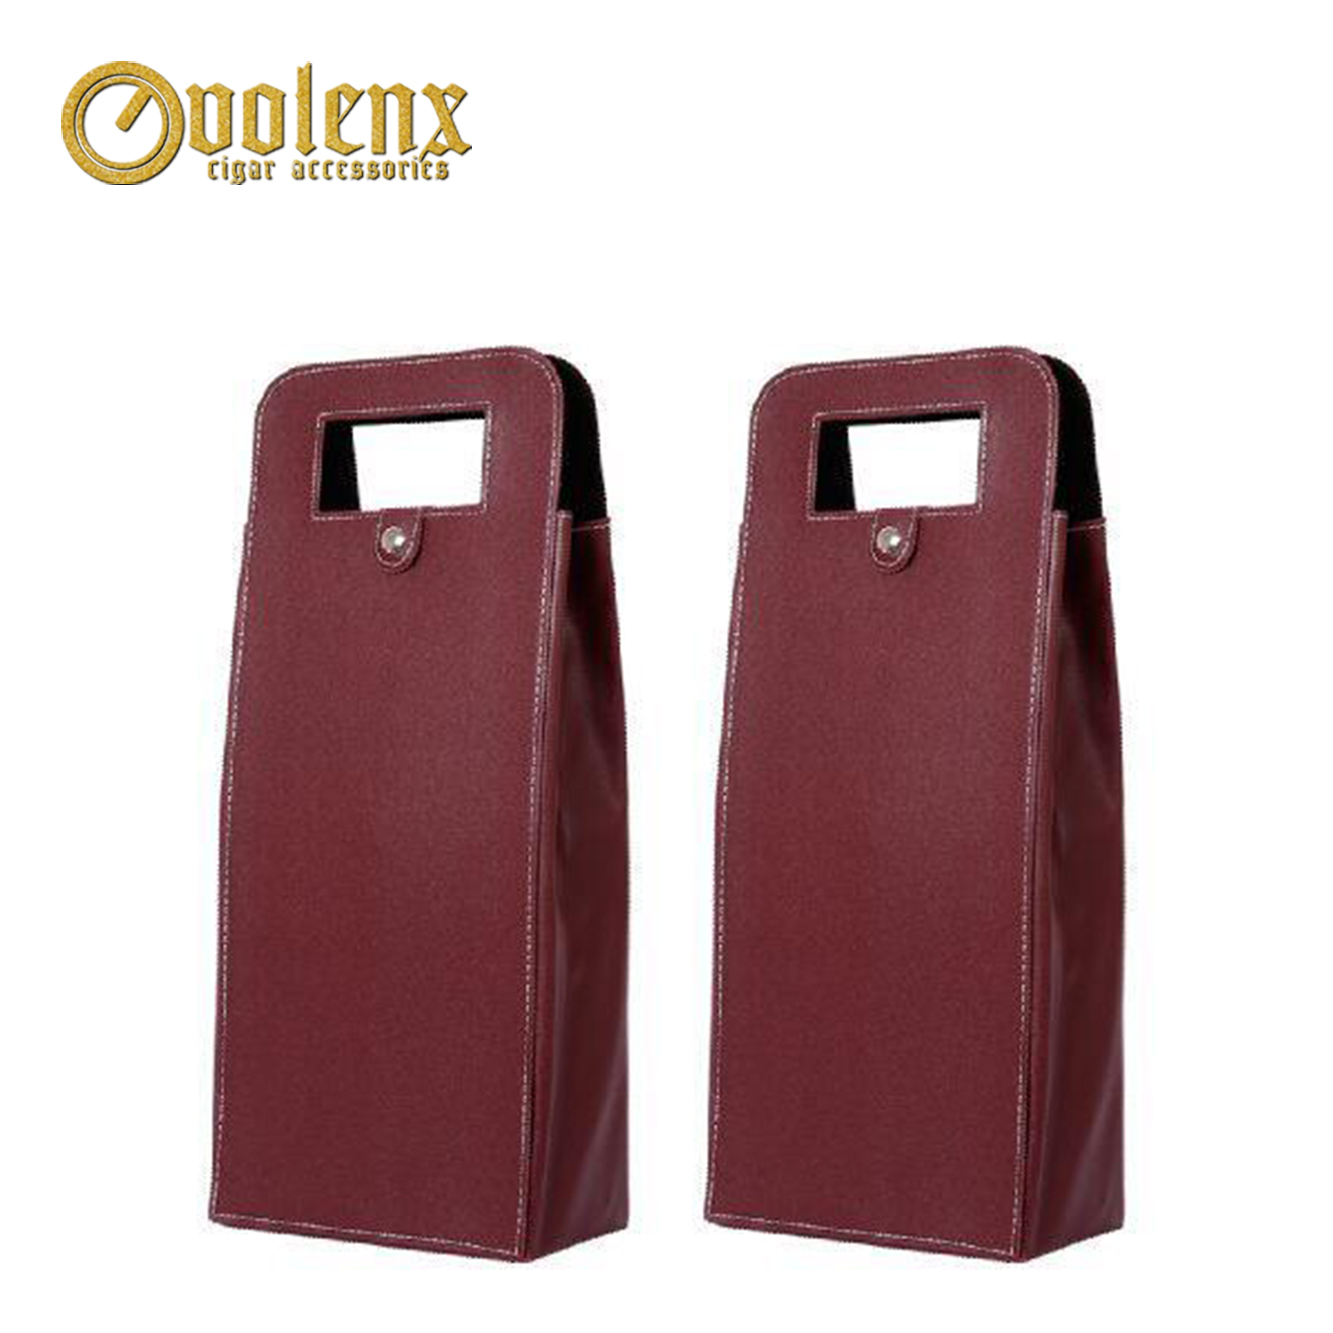 Customize Size and Package Handmade PU Leather Wine Box 8